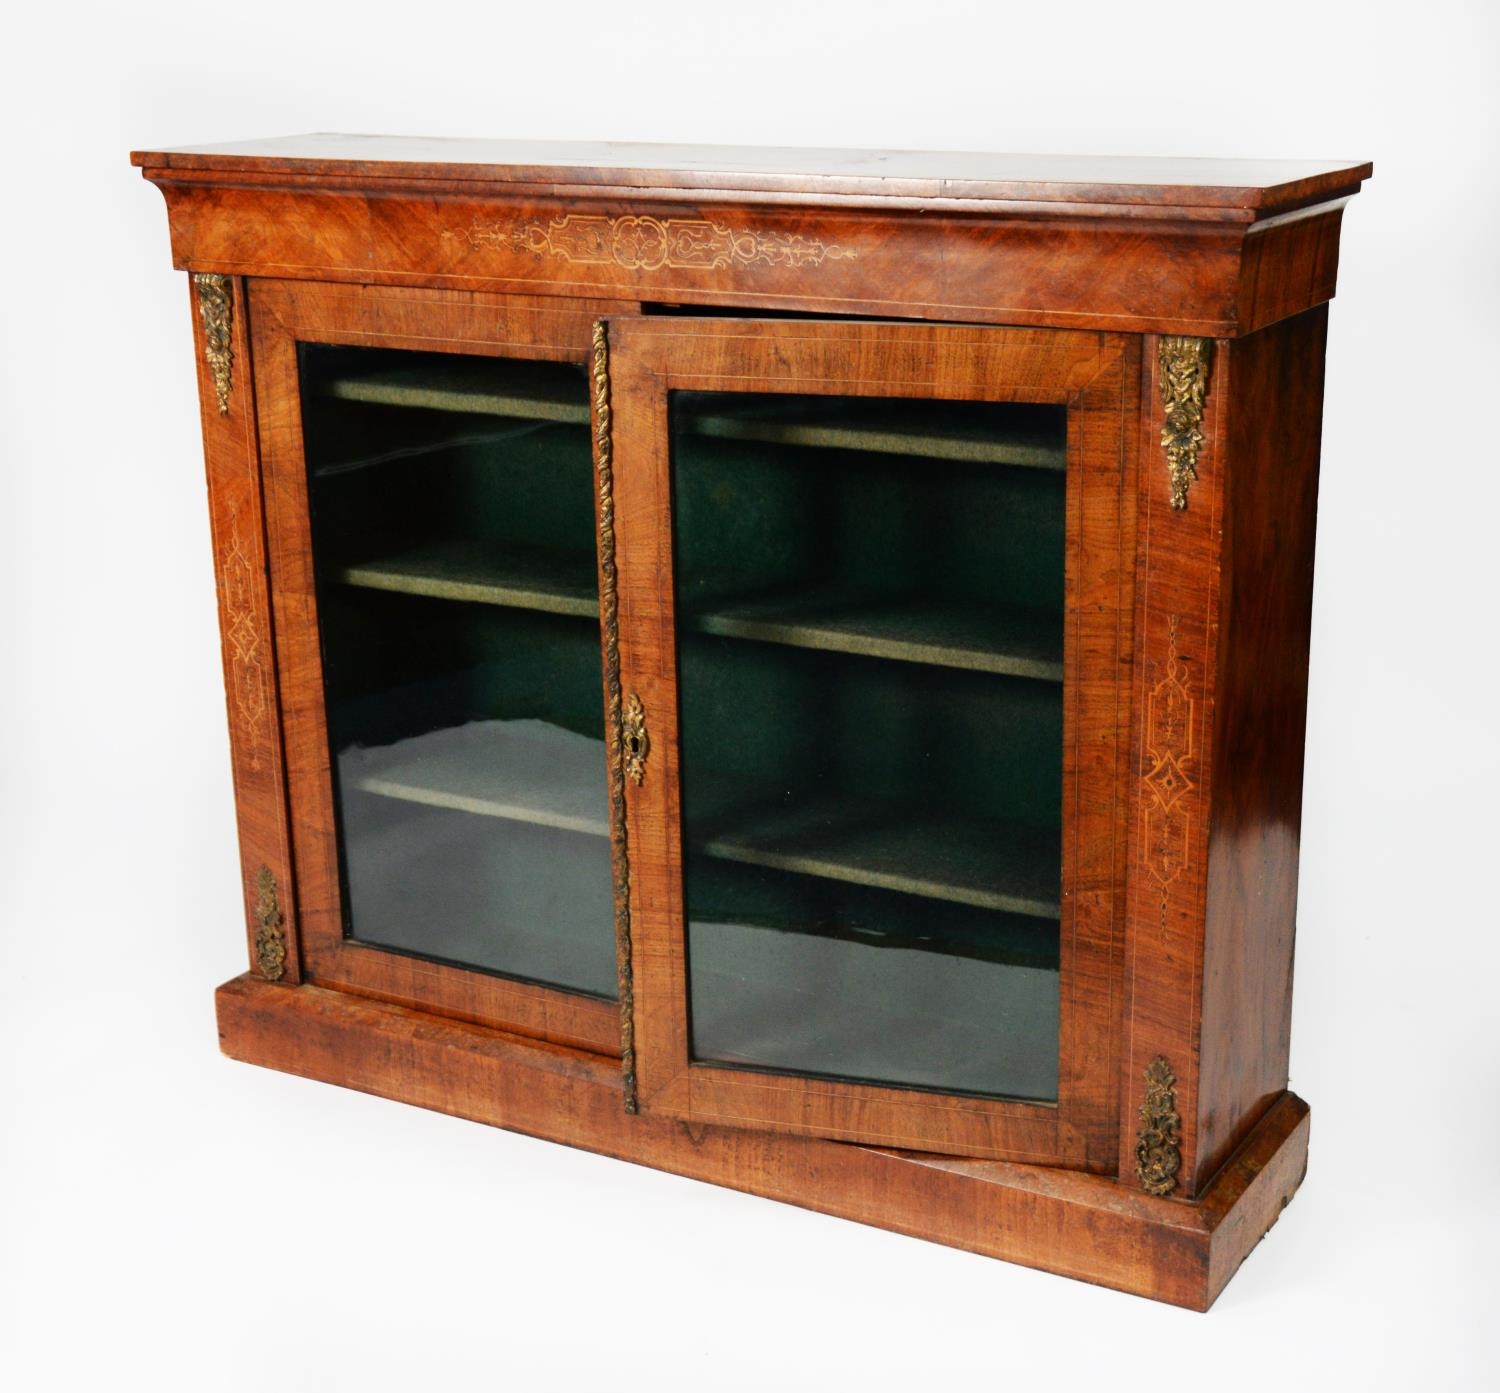 VICTORIAN INLAID AND FIGURED WALNUT DISPLAY CABINET WITH GILT METAL MOUNTS, the oblong top set above - Image 2 of 3